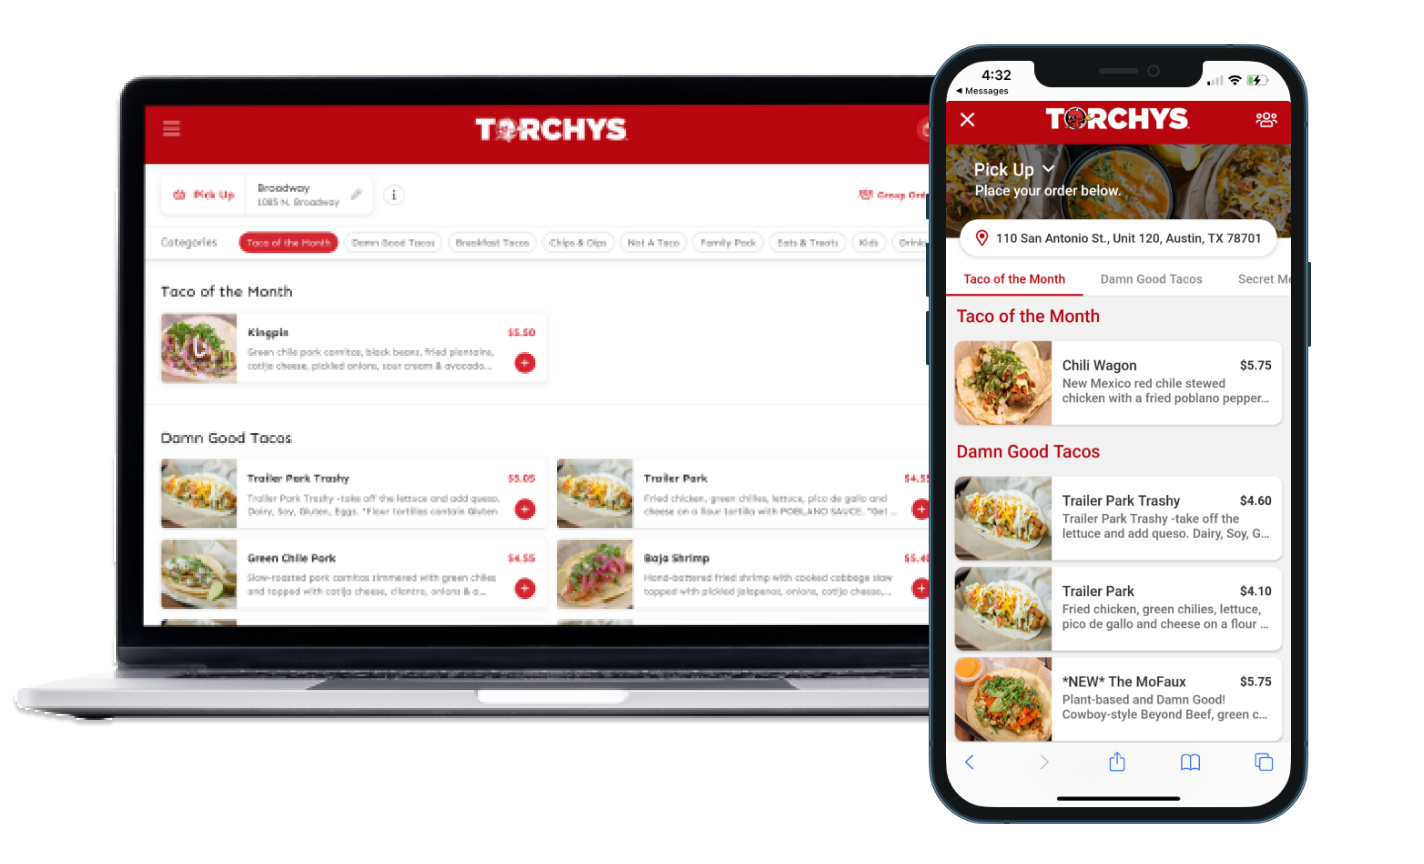 CardFree online ordering pages via web and mobile app